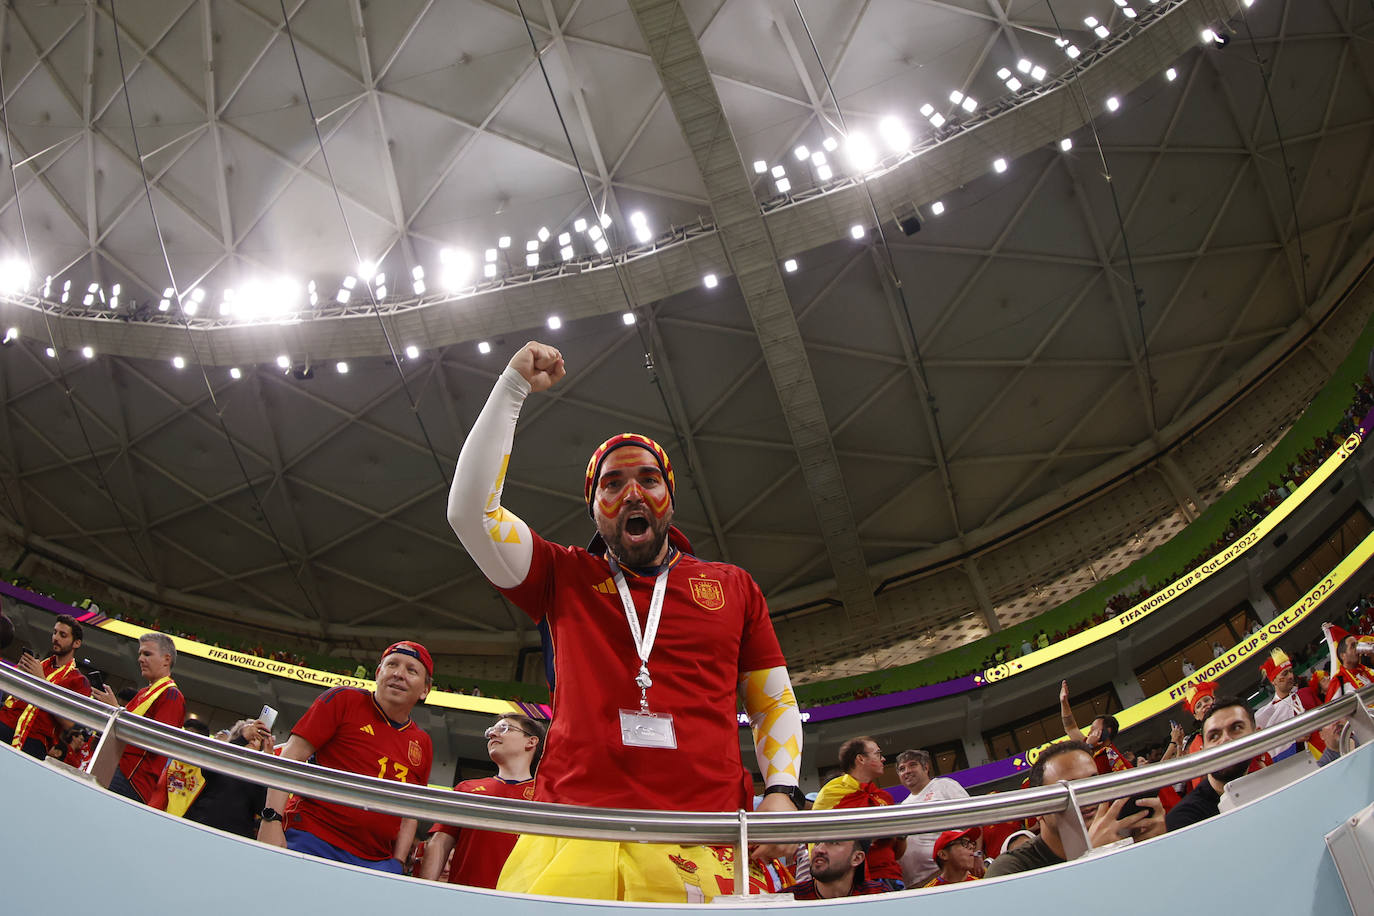 The best images from the Spain versus Costa Rica FIFA World Cup 2022 game